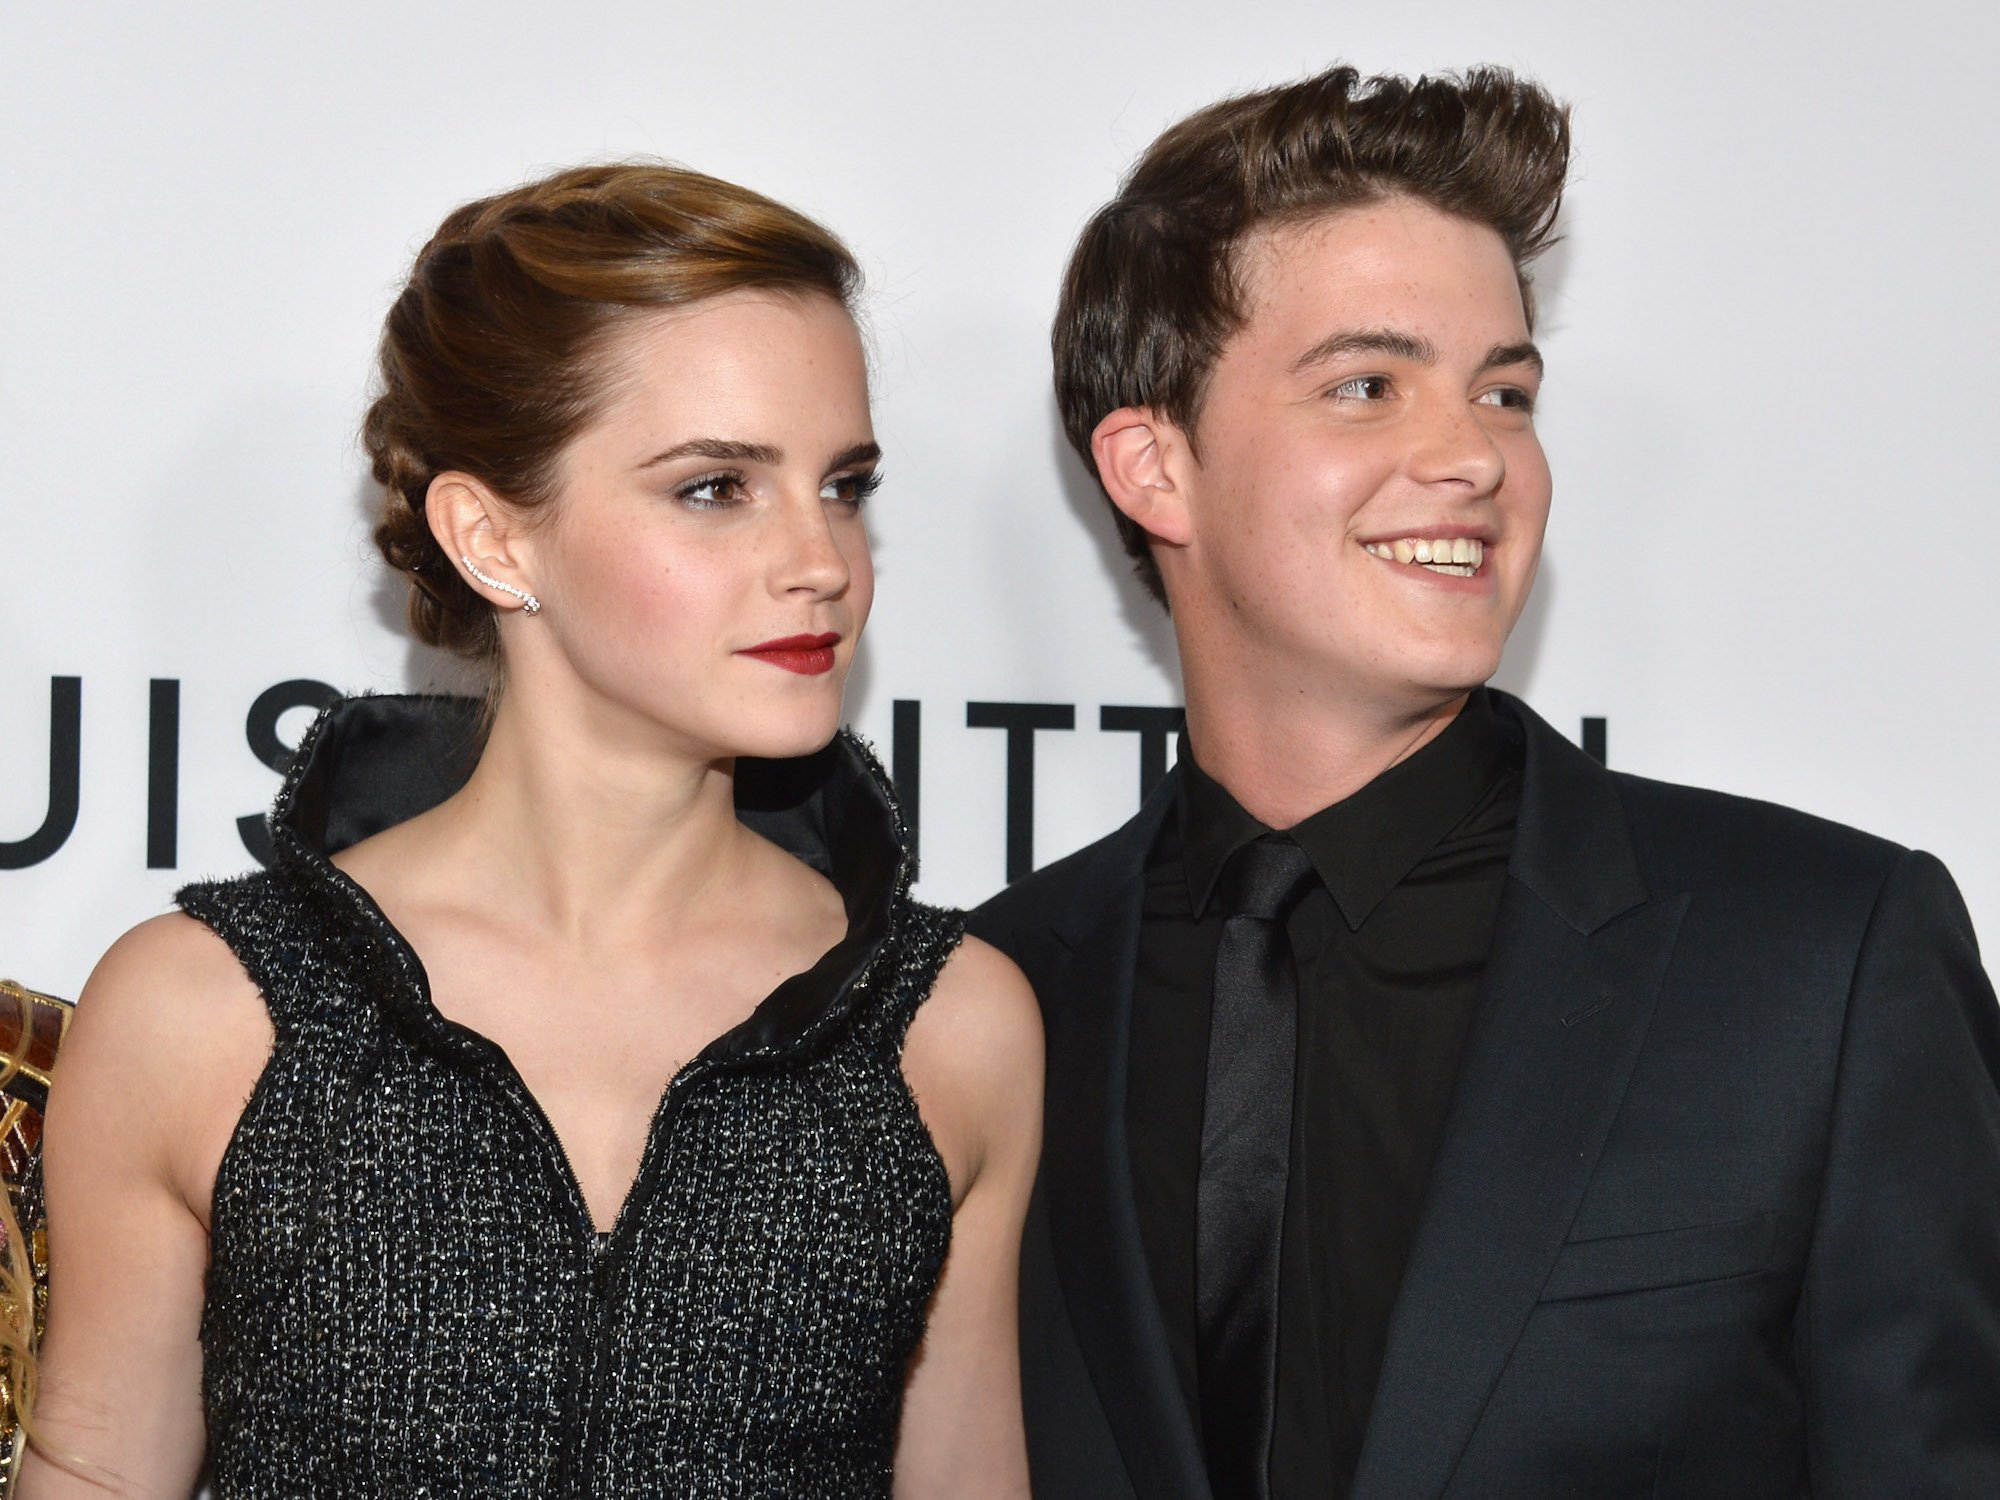 Emma Watson and Israel Broussard at the premiere of A24's 'The Bling Ring' in 2013.